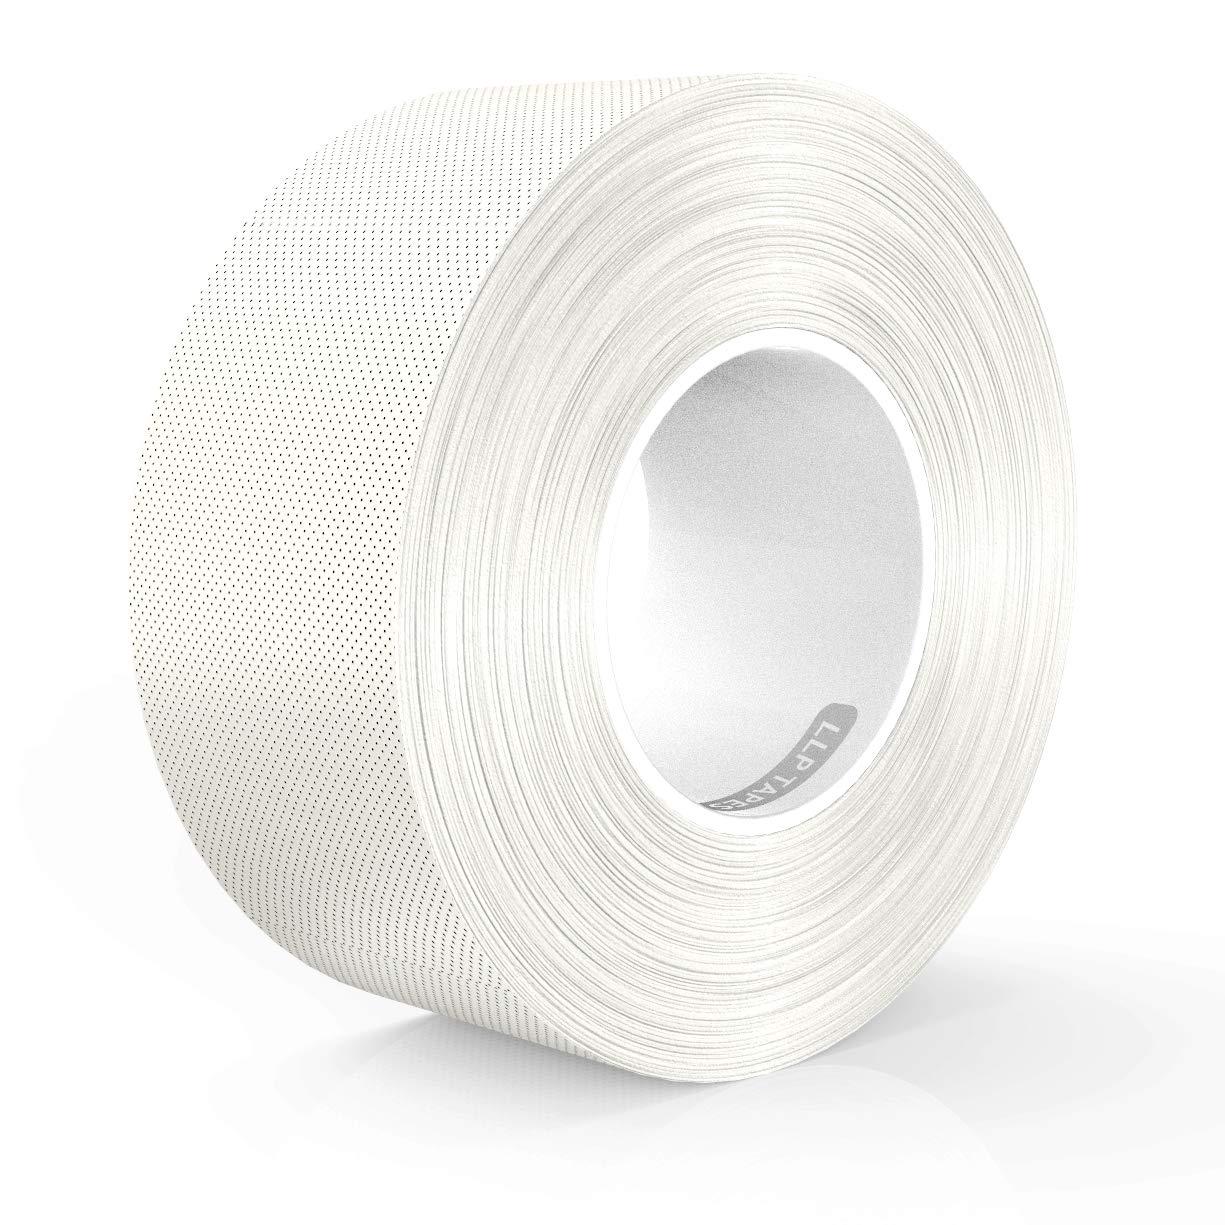 LLPT, LLPT Duct Tape Premium Grade 2.36 Inches x 108 Feet x 11 Mil Residue Free Strong Waterproof Adhesive Color White